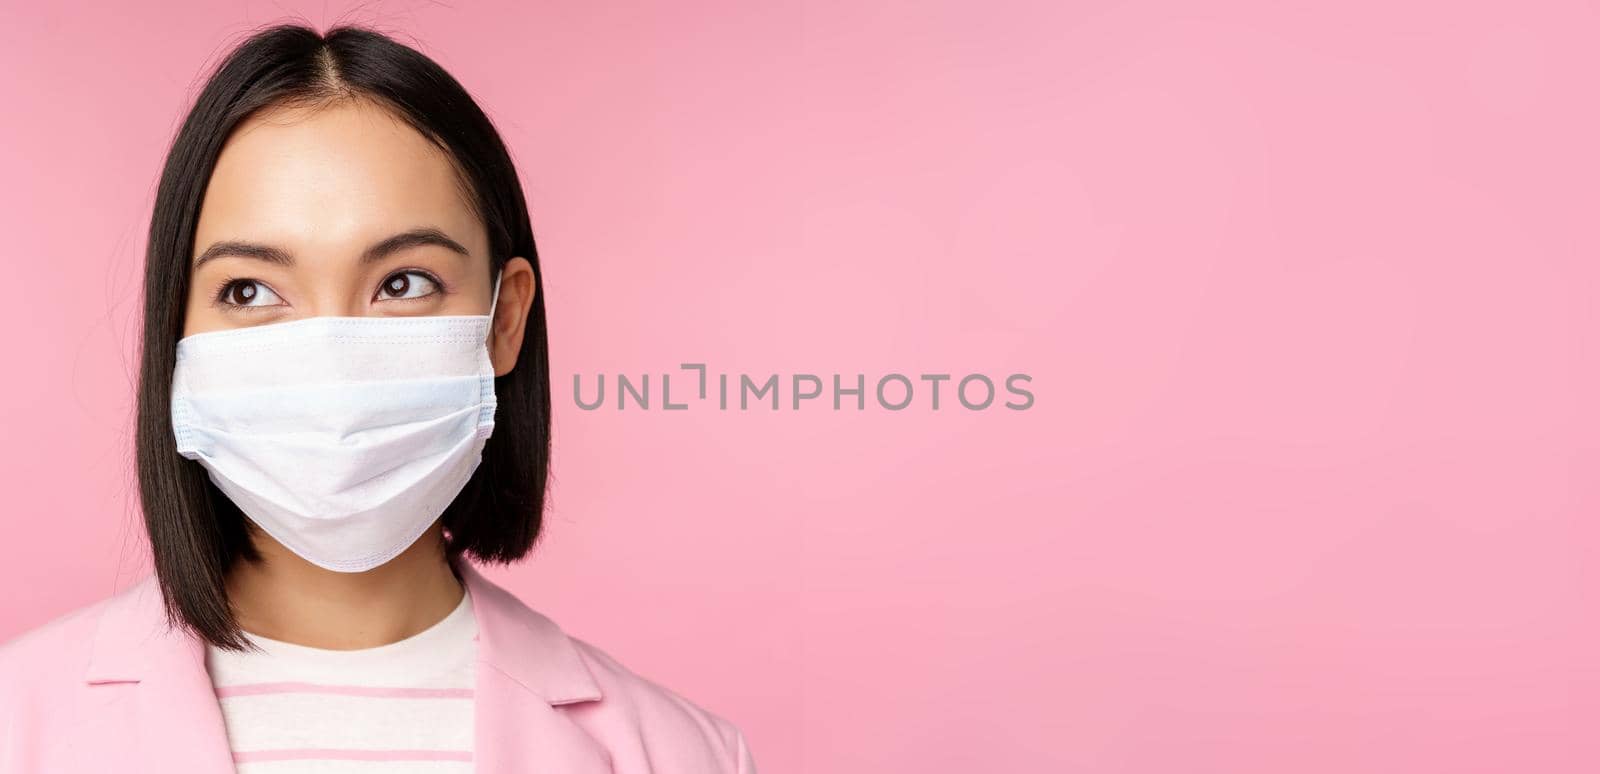 Close up portrait of japanese corporate woman in medical face mask from covid-19, looking left at logo, sale promo, standing over pink background.